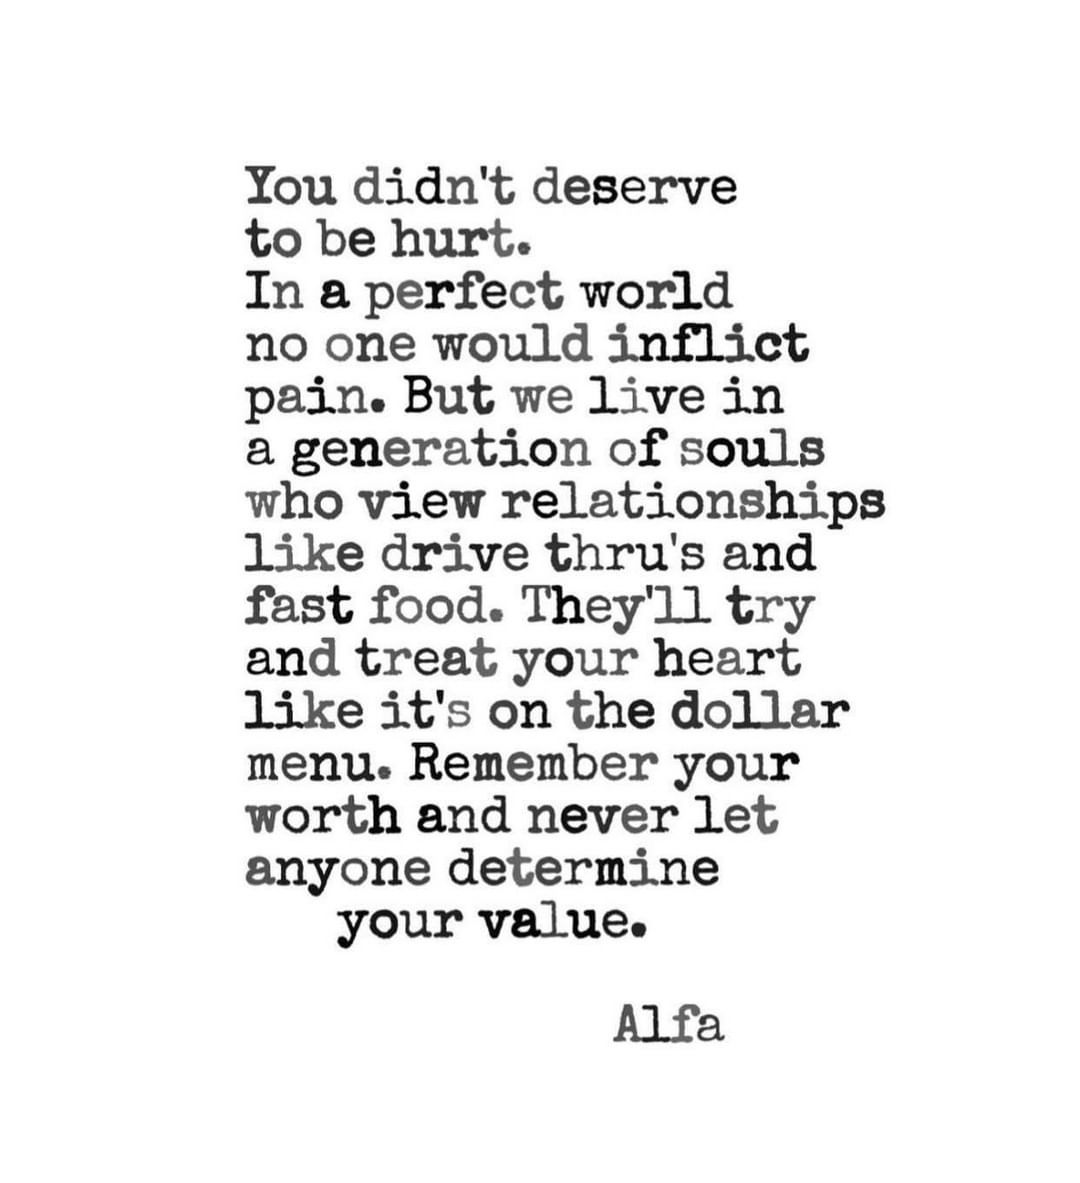 You didn't deserve to be hurt. In a perfect world no one would inflict pain. But we live in a generation of souls who view relationships like drive thru's and fast food. They'll try and treat your heart like it's on the dollar menu. Remember your worth and never let anyone determine your value.